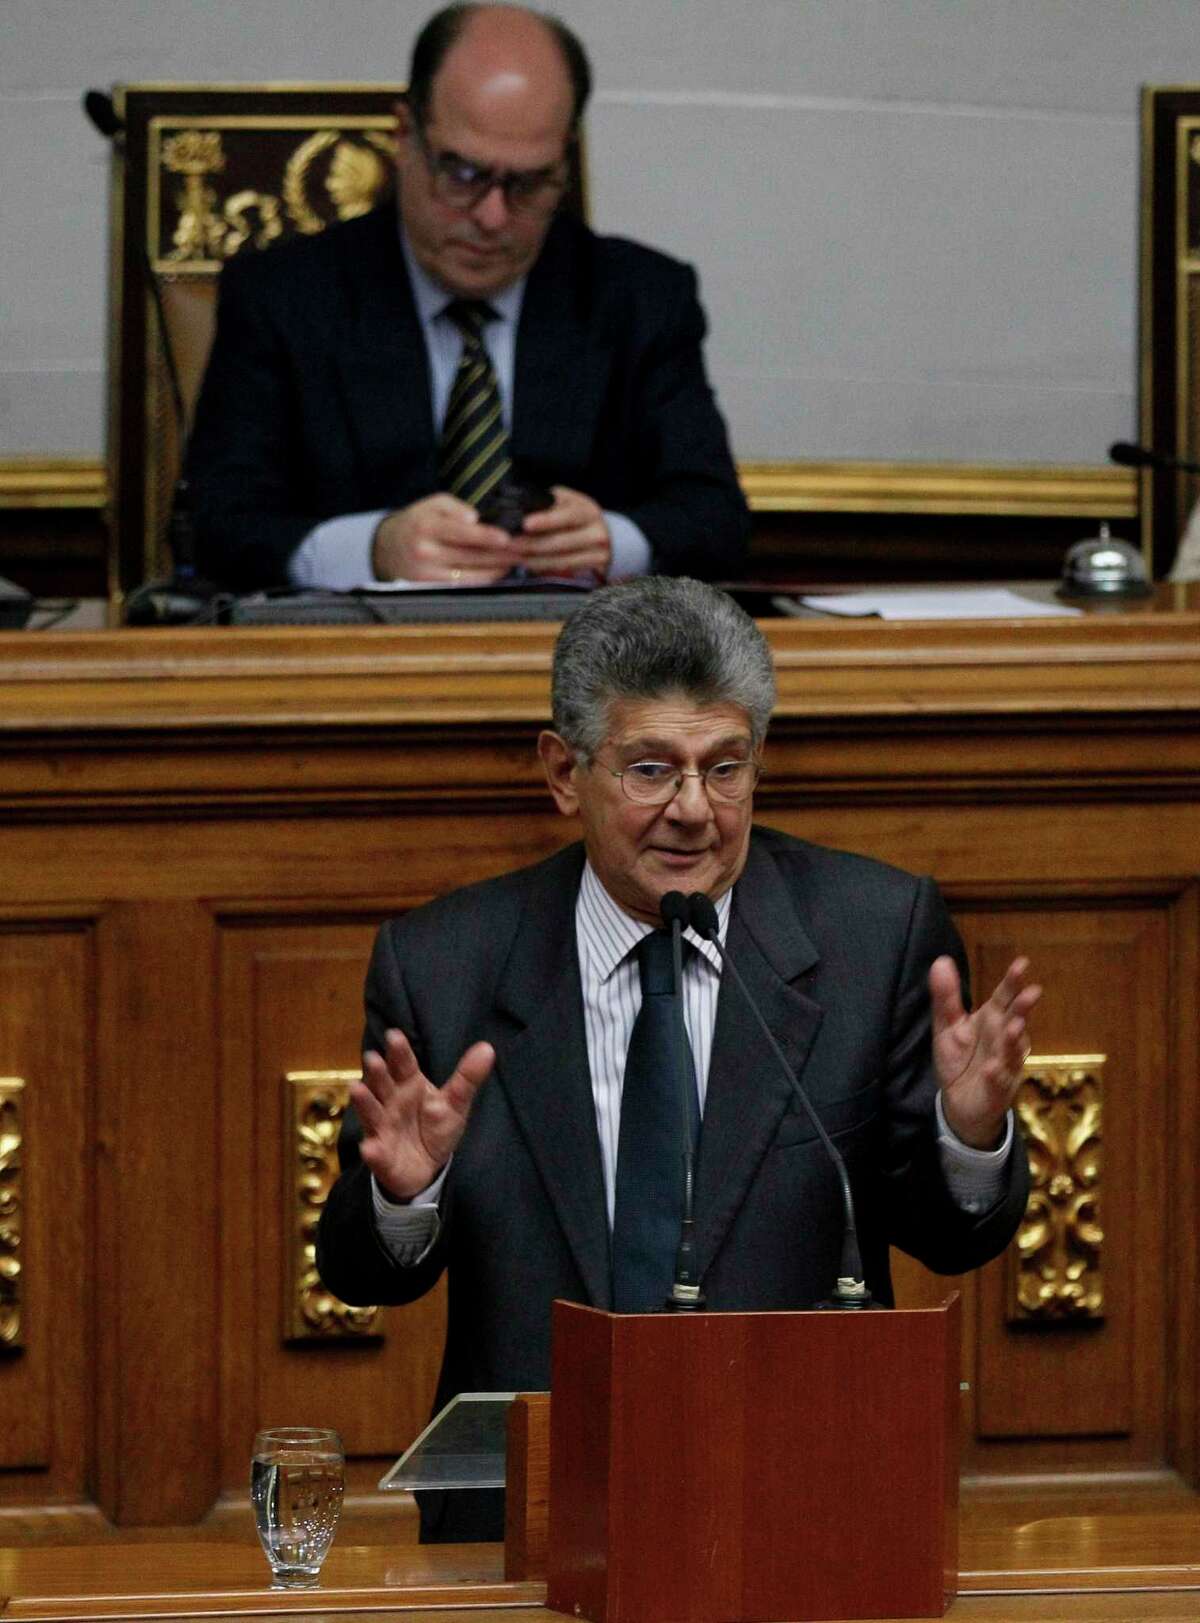 Opposition lawmaker Henry Ramos Allup speaks during a session of the National Assembly in Caracas, Venezuela, Monday, Aug. 7, 2017. The opposition-controlled National Assembly vowed to continue meeting at the stately legislative palace - a short walk across a plaza from where the all-powerful Constitutional Assembly is expected to hold its next meeting Tuesday. National Assembly President Julio Borges, pictured in background, told fellow lawmakers they should keep an active presence in the building despite threats from the new assembly to swiftly strip them of any authority and lock up key leaders. (AP Photo/Ariana Cubillos) ORG XMIT: XFLL104